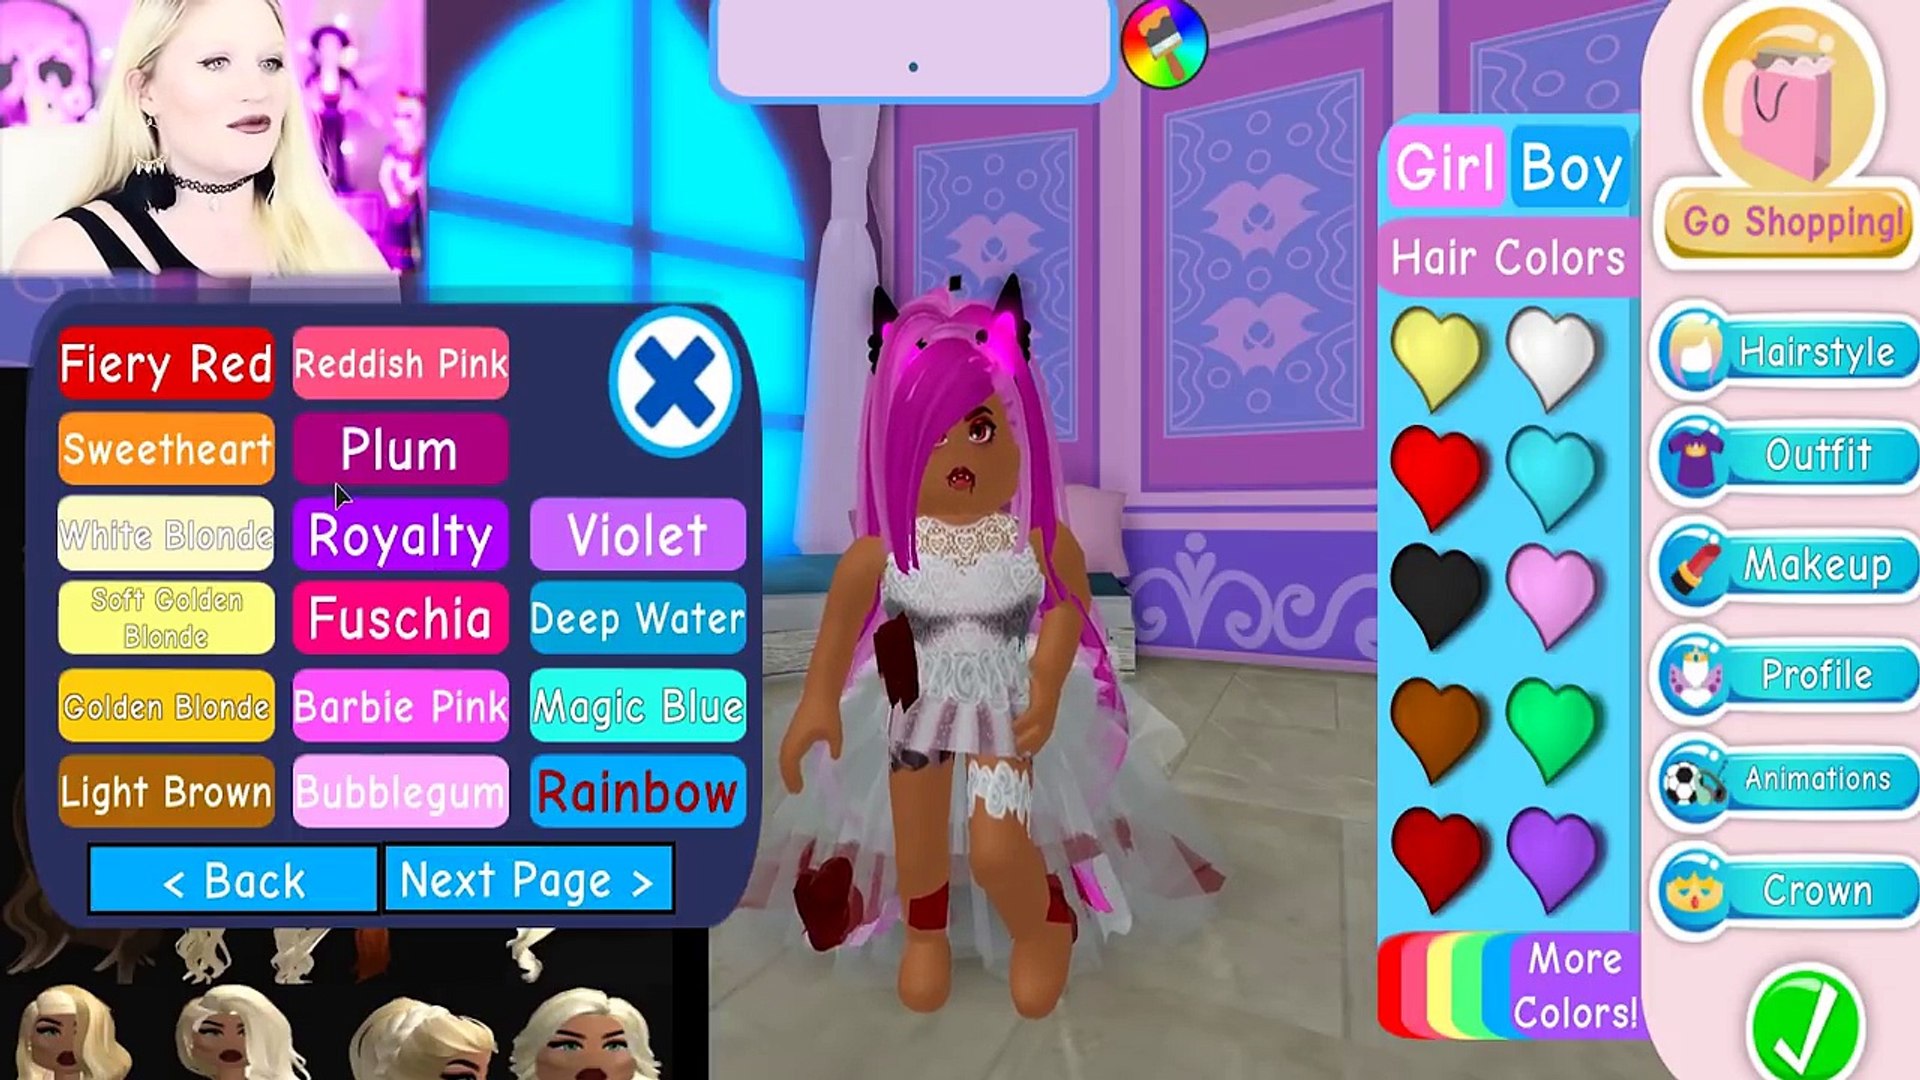 How To Get Free Stuff In Royale High Roblox 2020